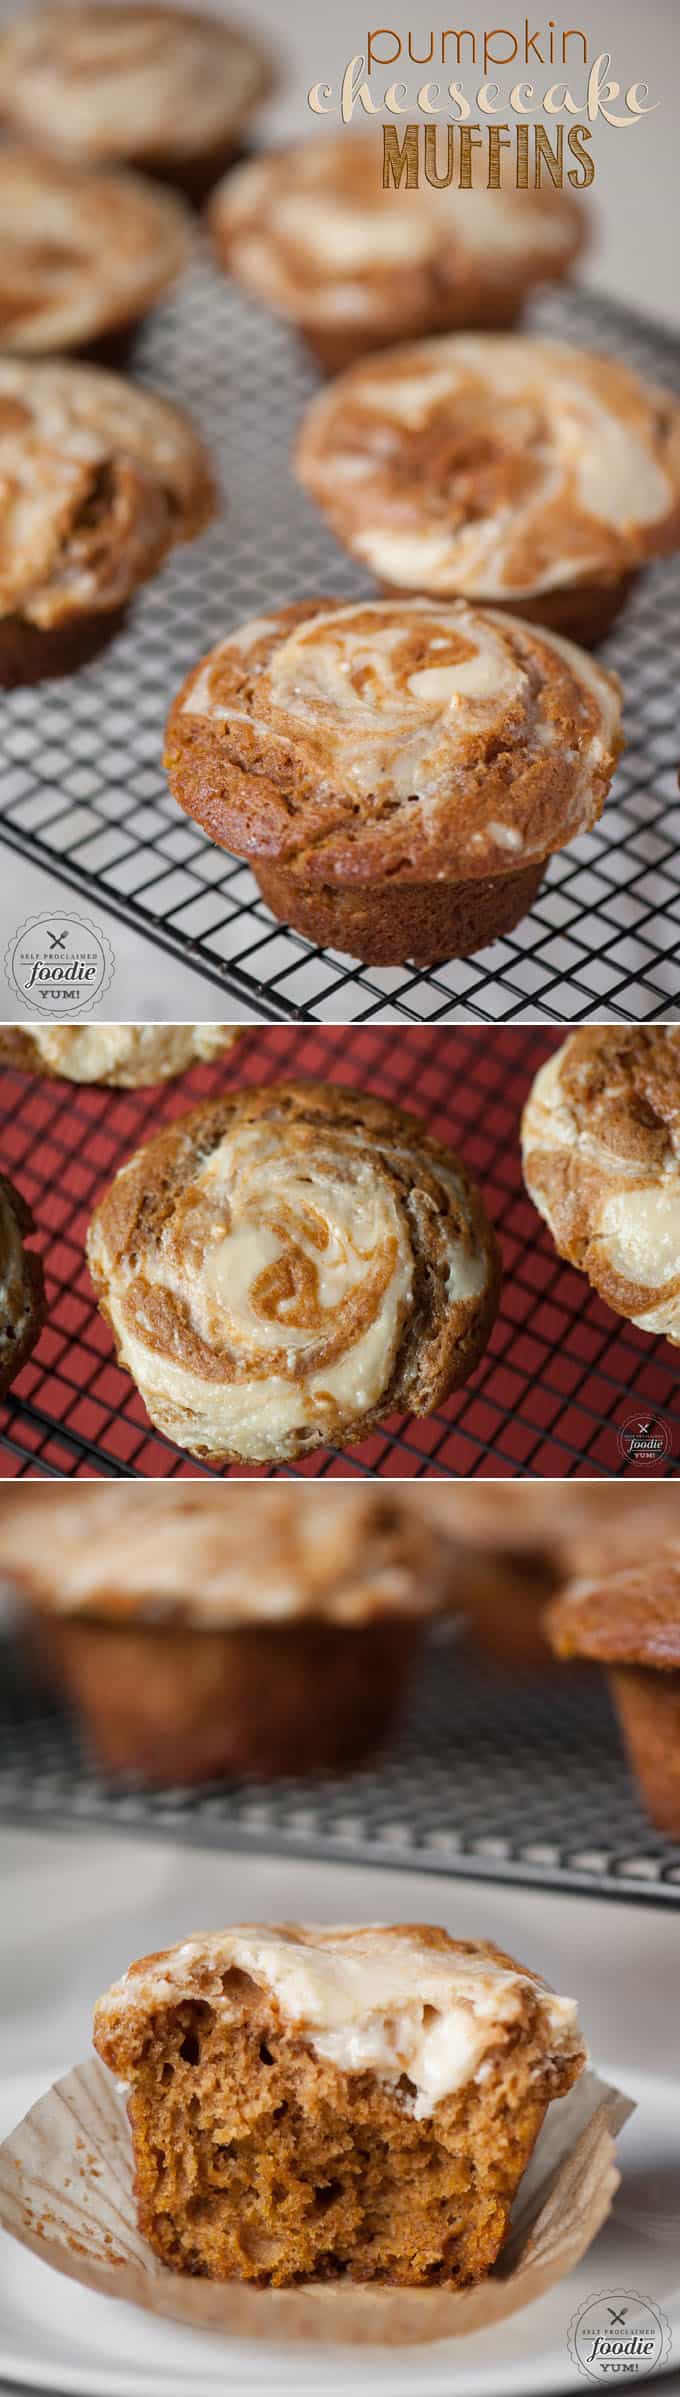 Muffin or cupcake? Its hard to tell with these incredibly moist, super tasty, and slightly naughty Pumpkin Cheesecake Muffins. You will love them!